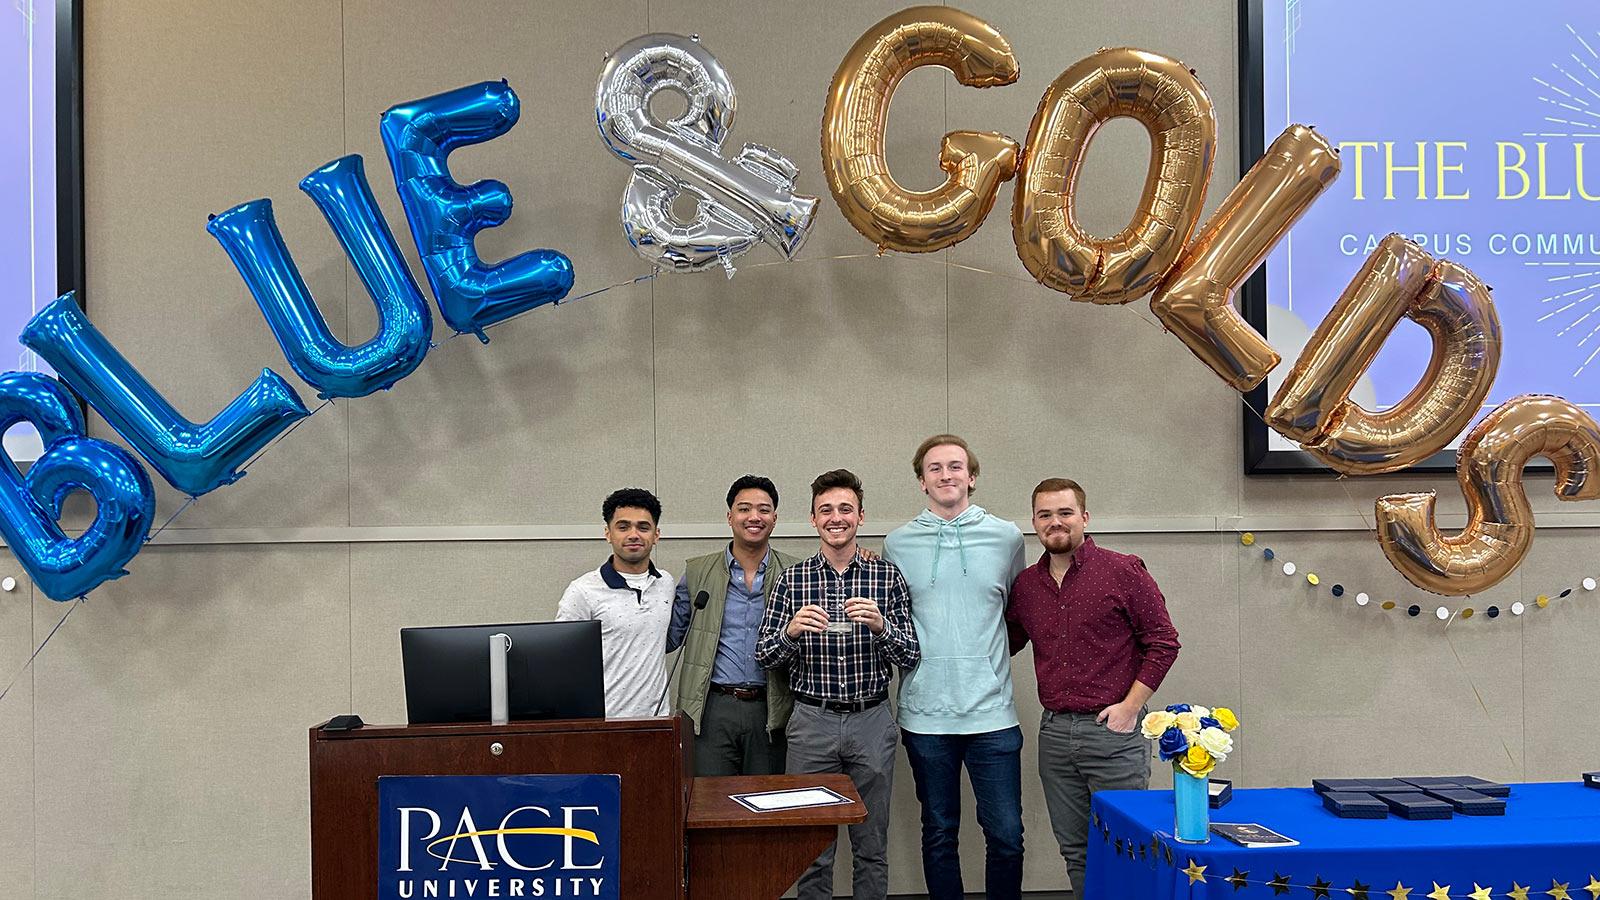 Pace University Students at the Pace Blue & Gold Awards Ceremony